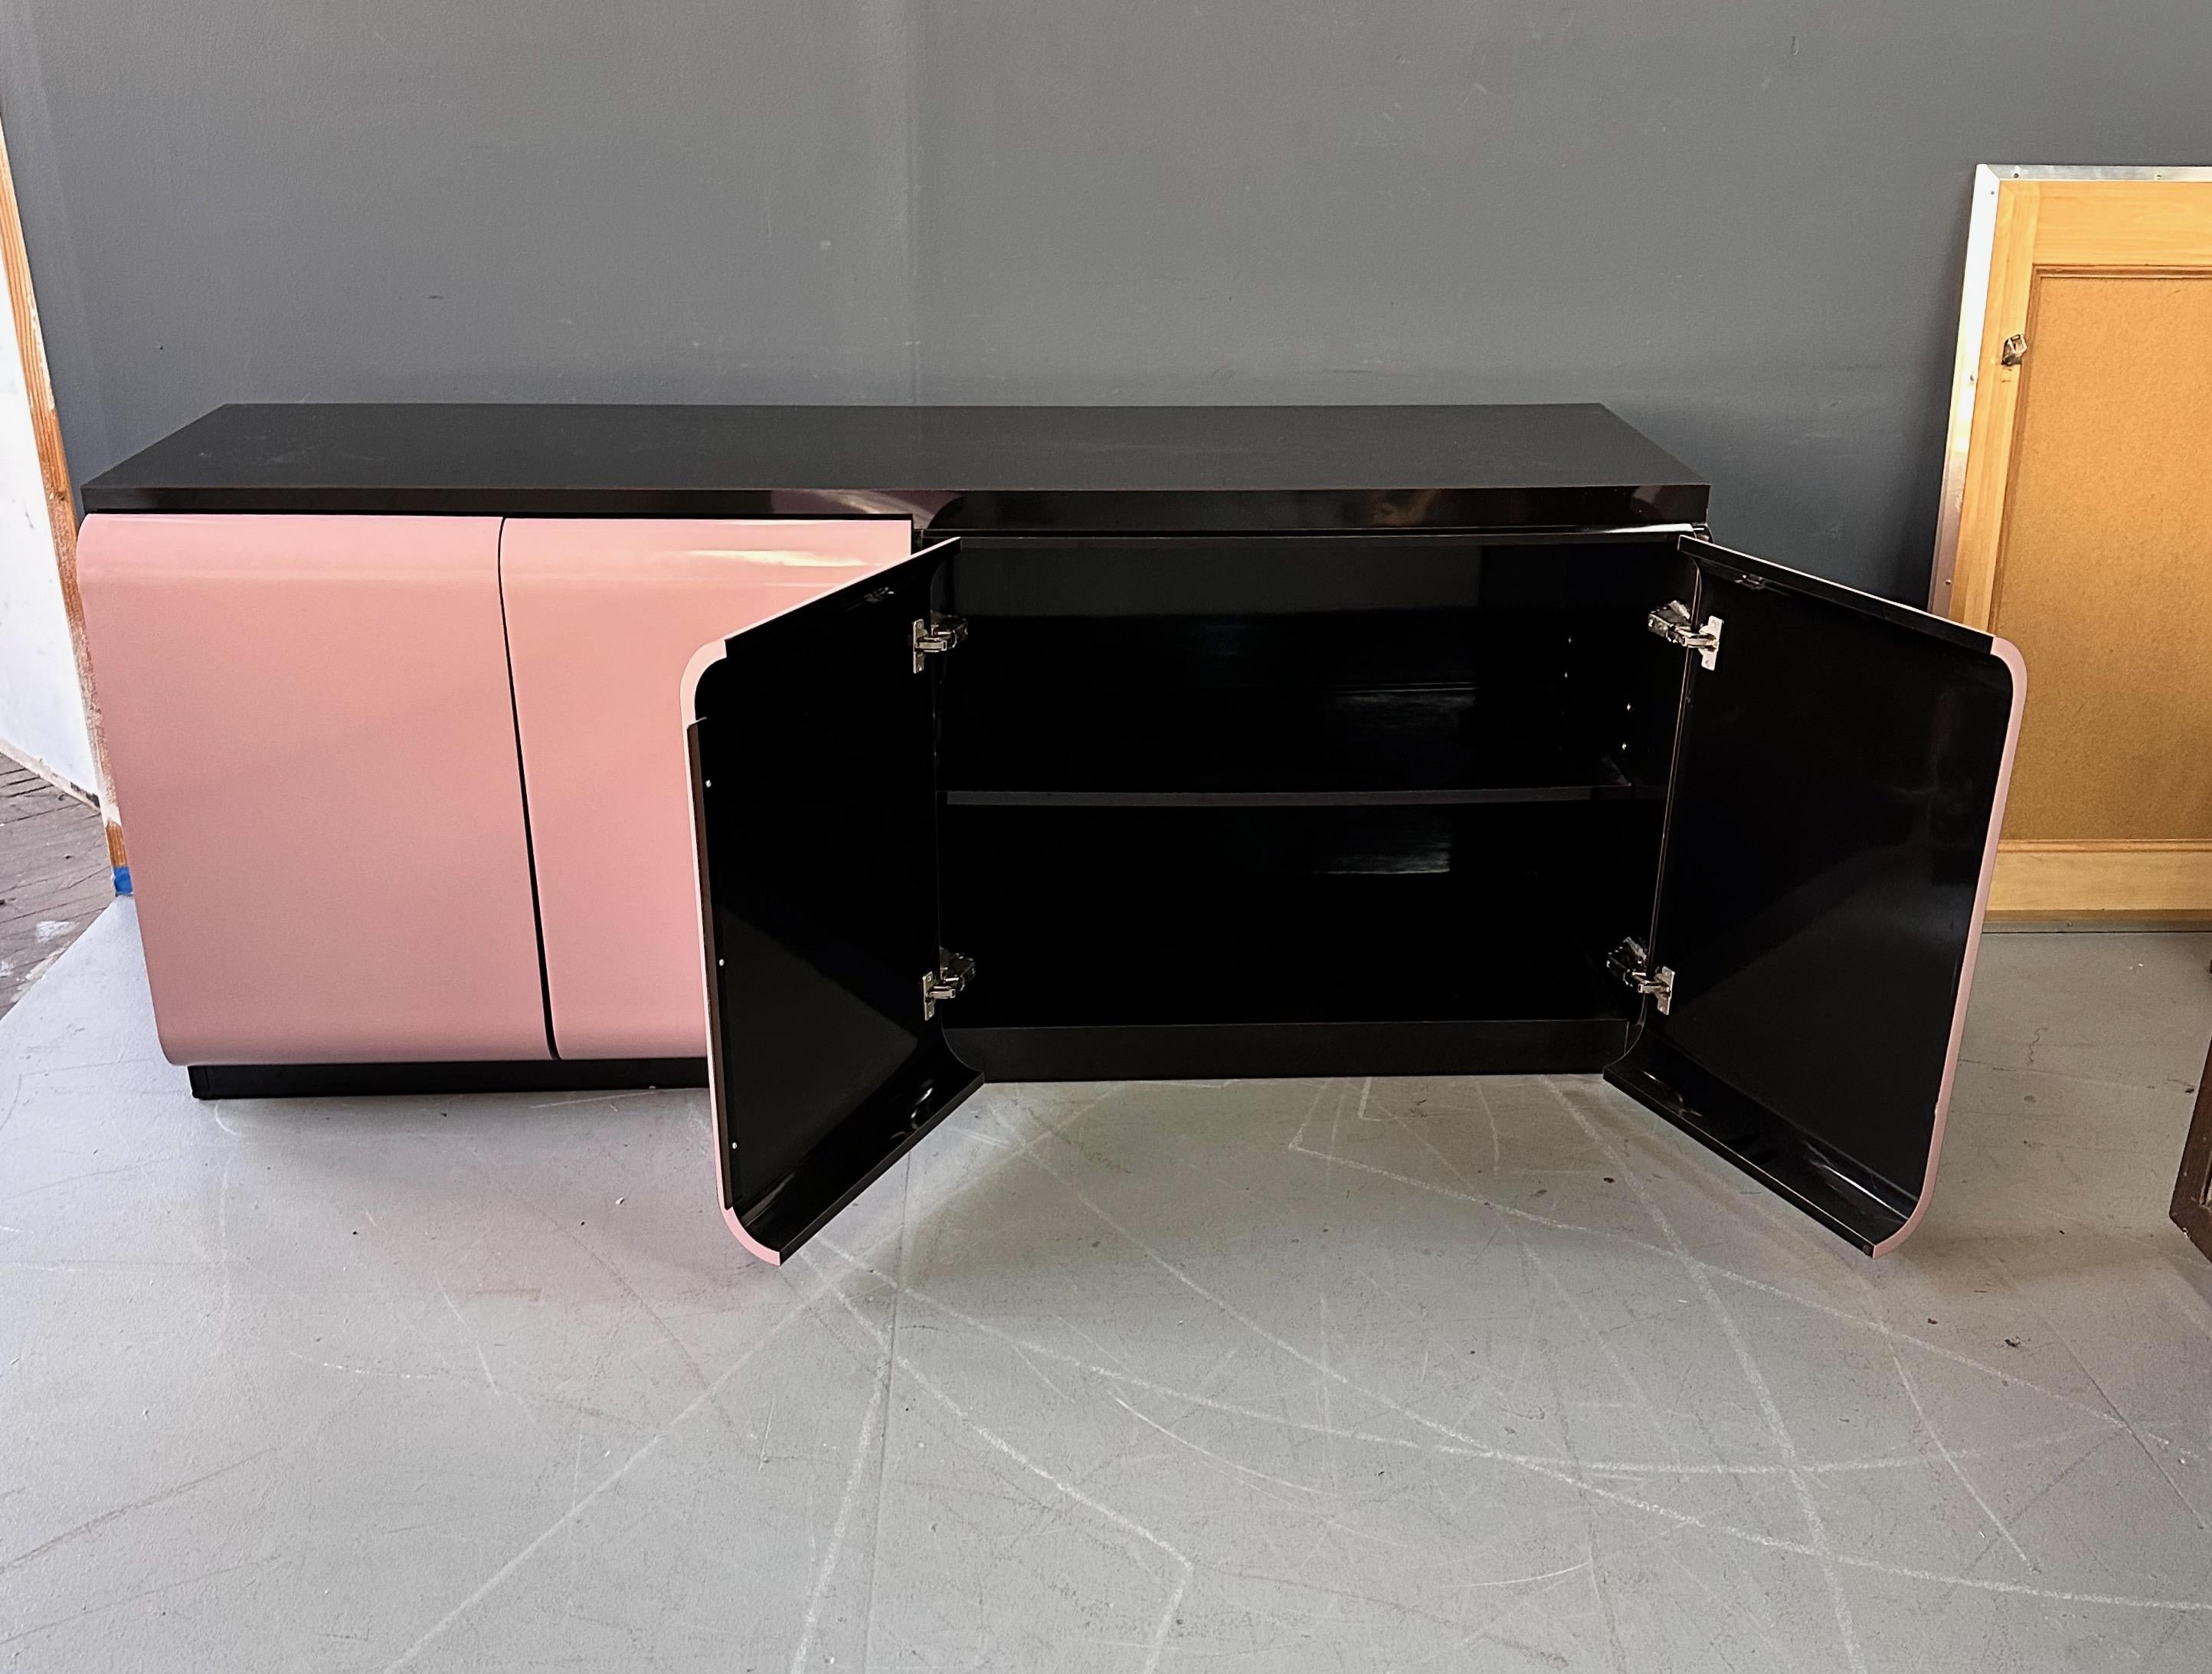 European 1980s Post Modern Laminate Four Door Credenza in Mauve with One Drawer & Shelves For Sale